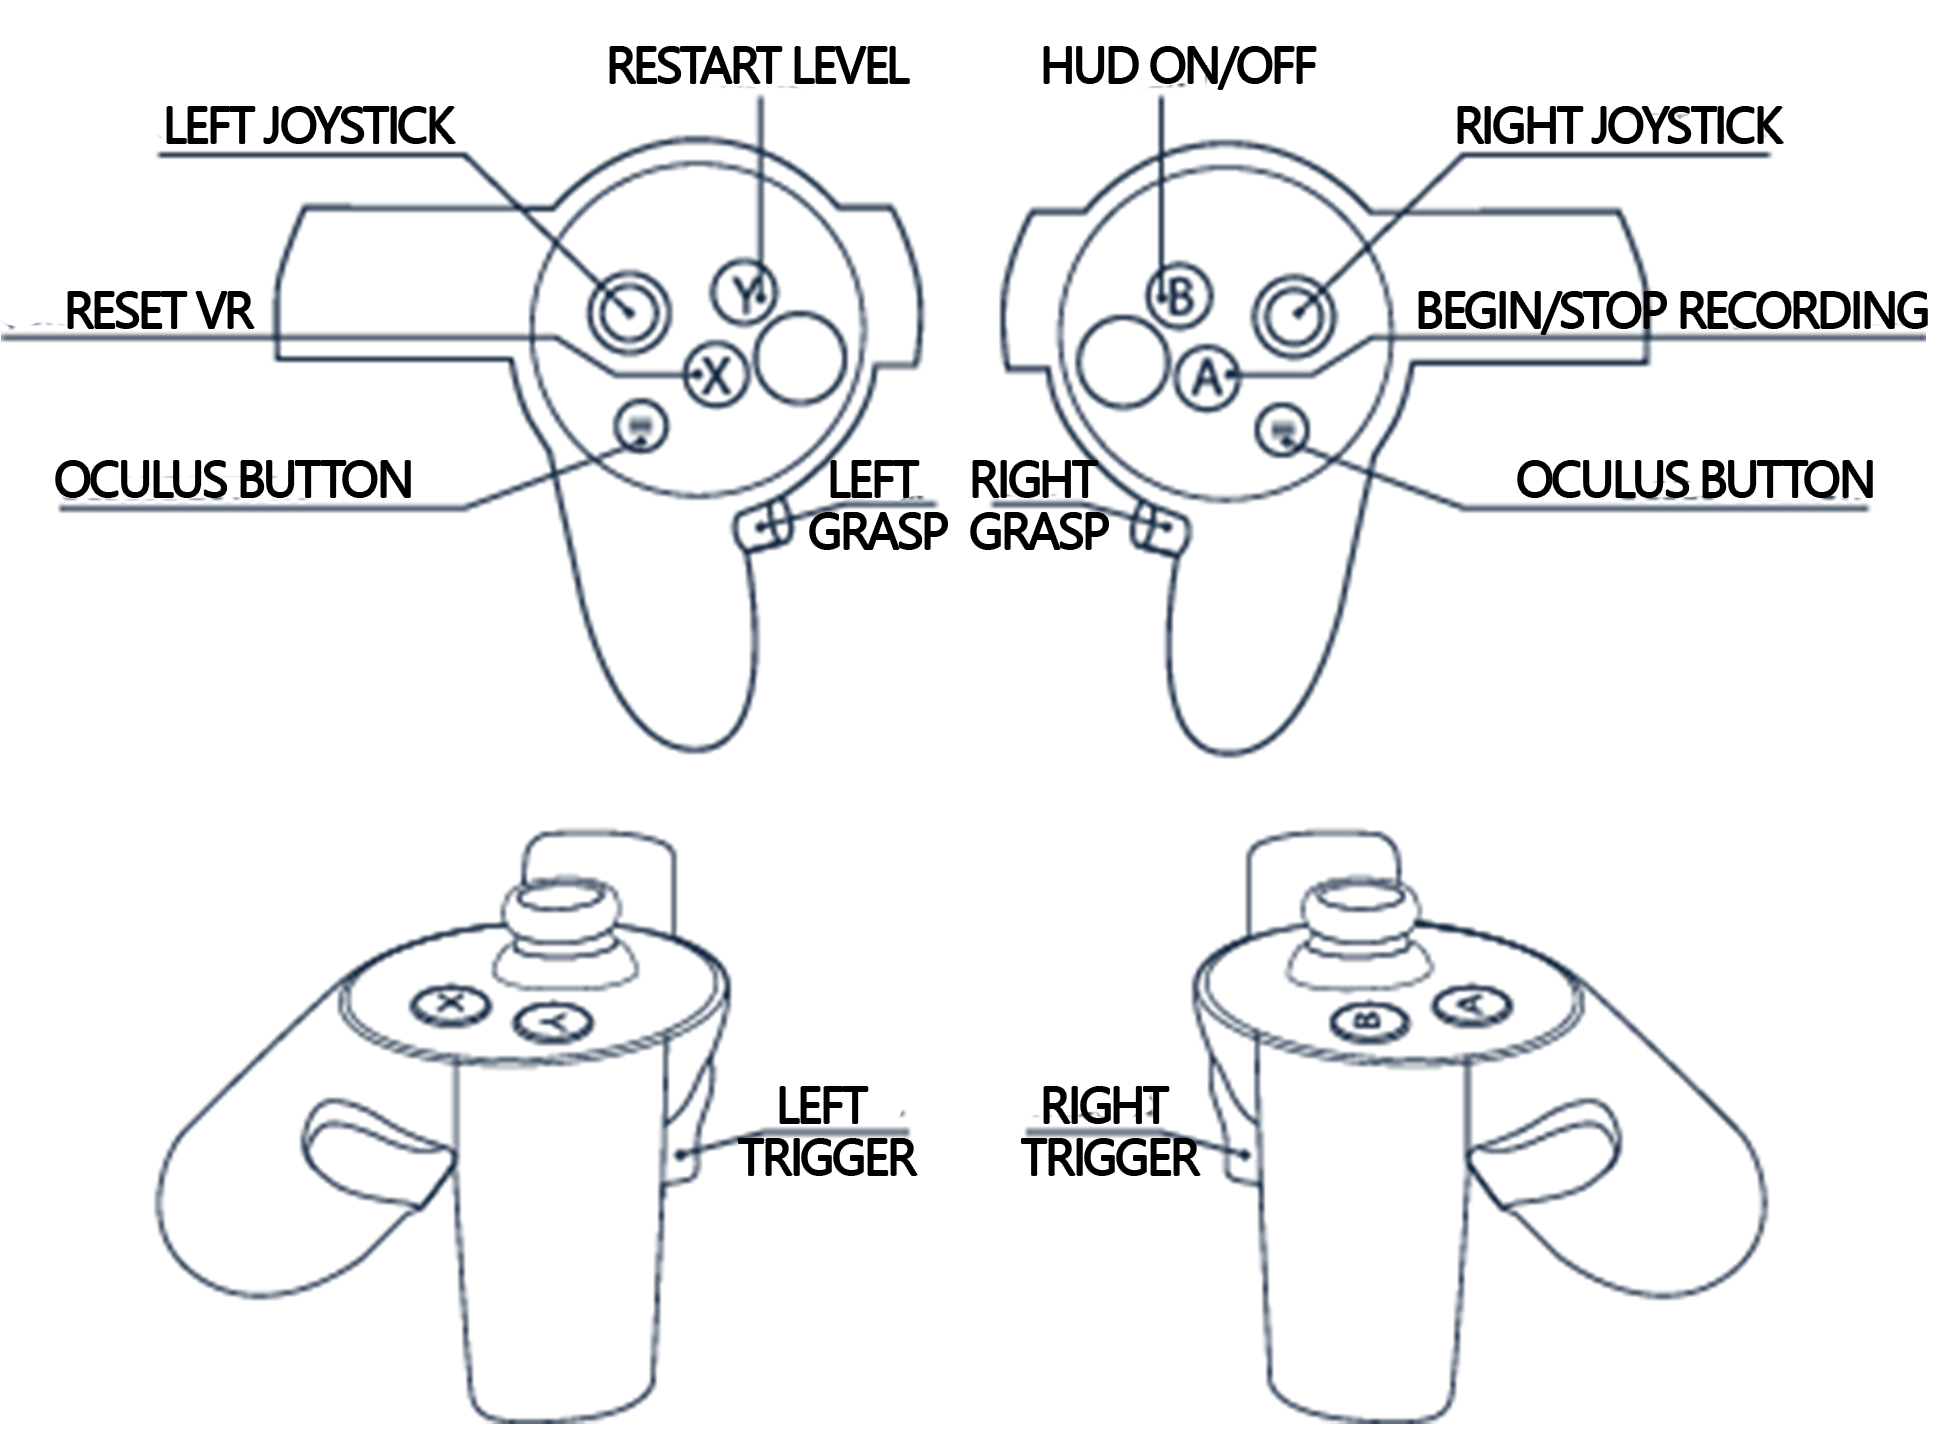 Oculus controller representation with the correspondence between the robot actions and cotroller buttons.